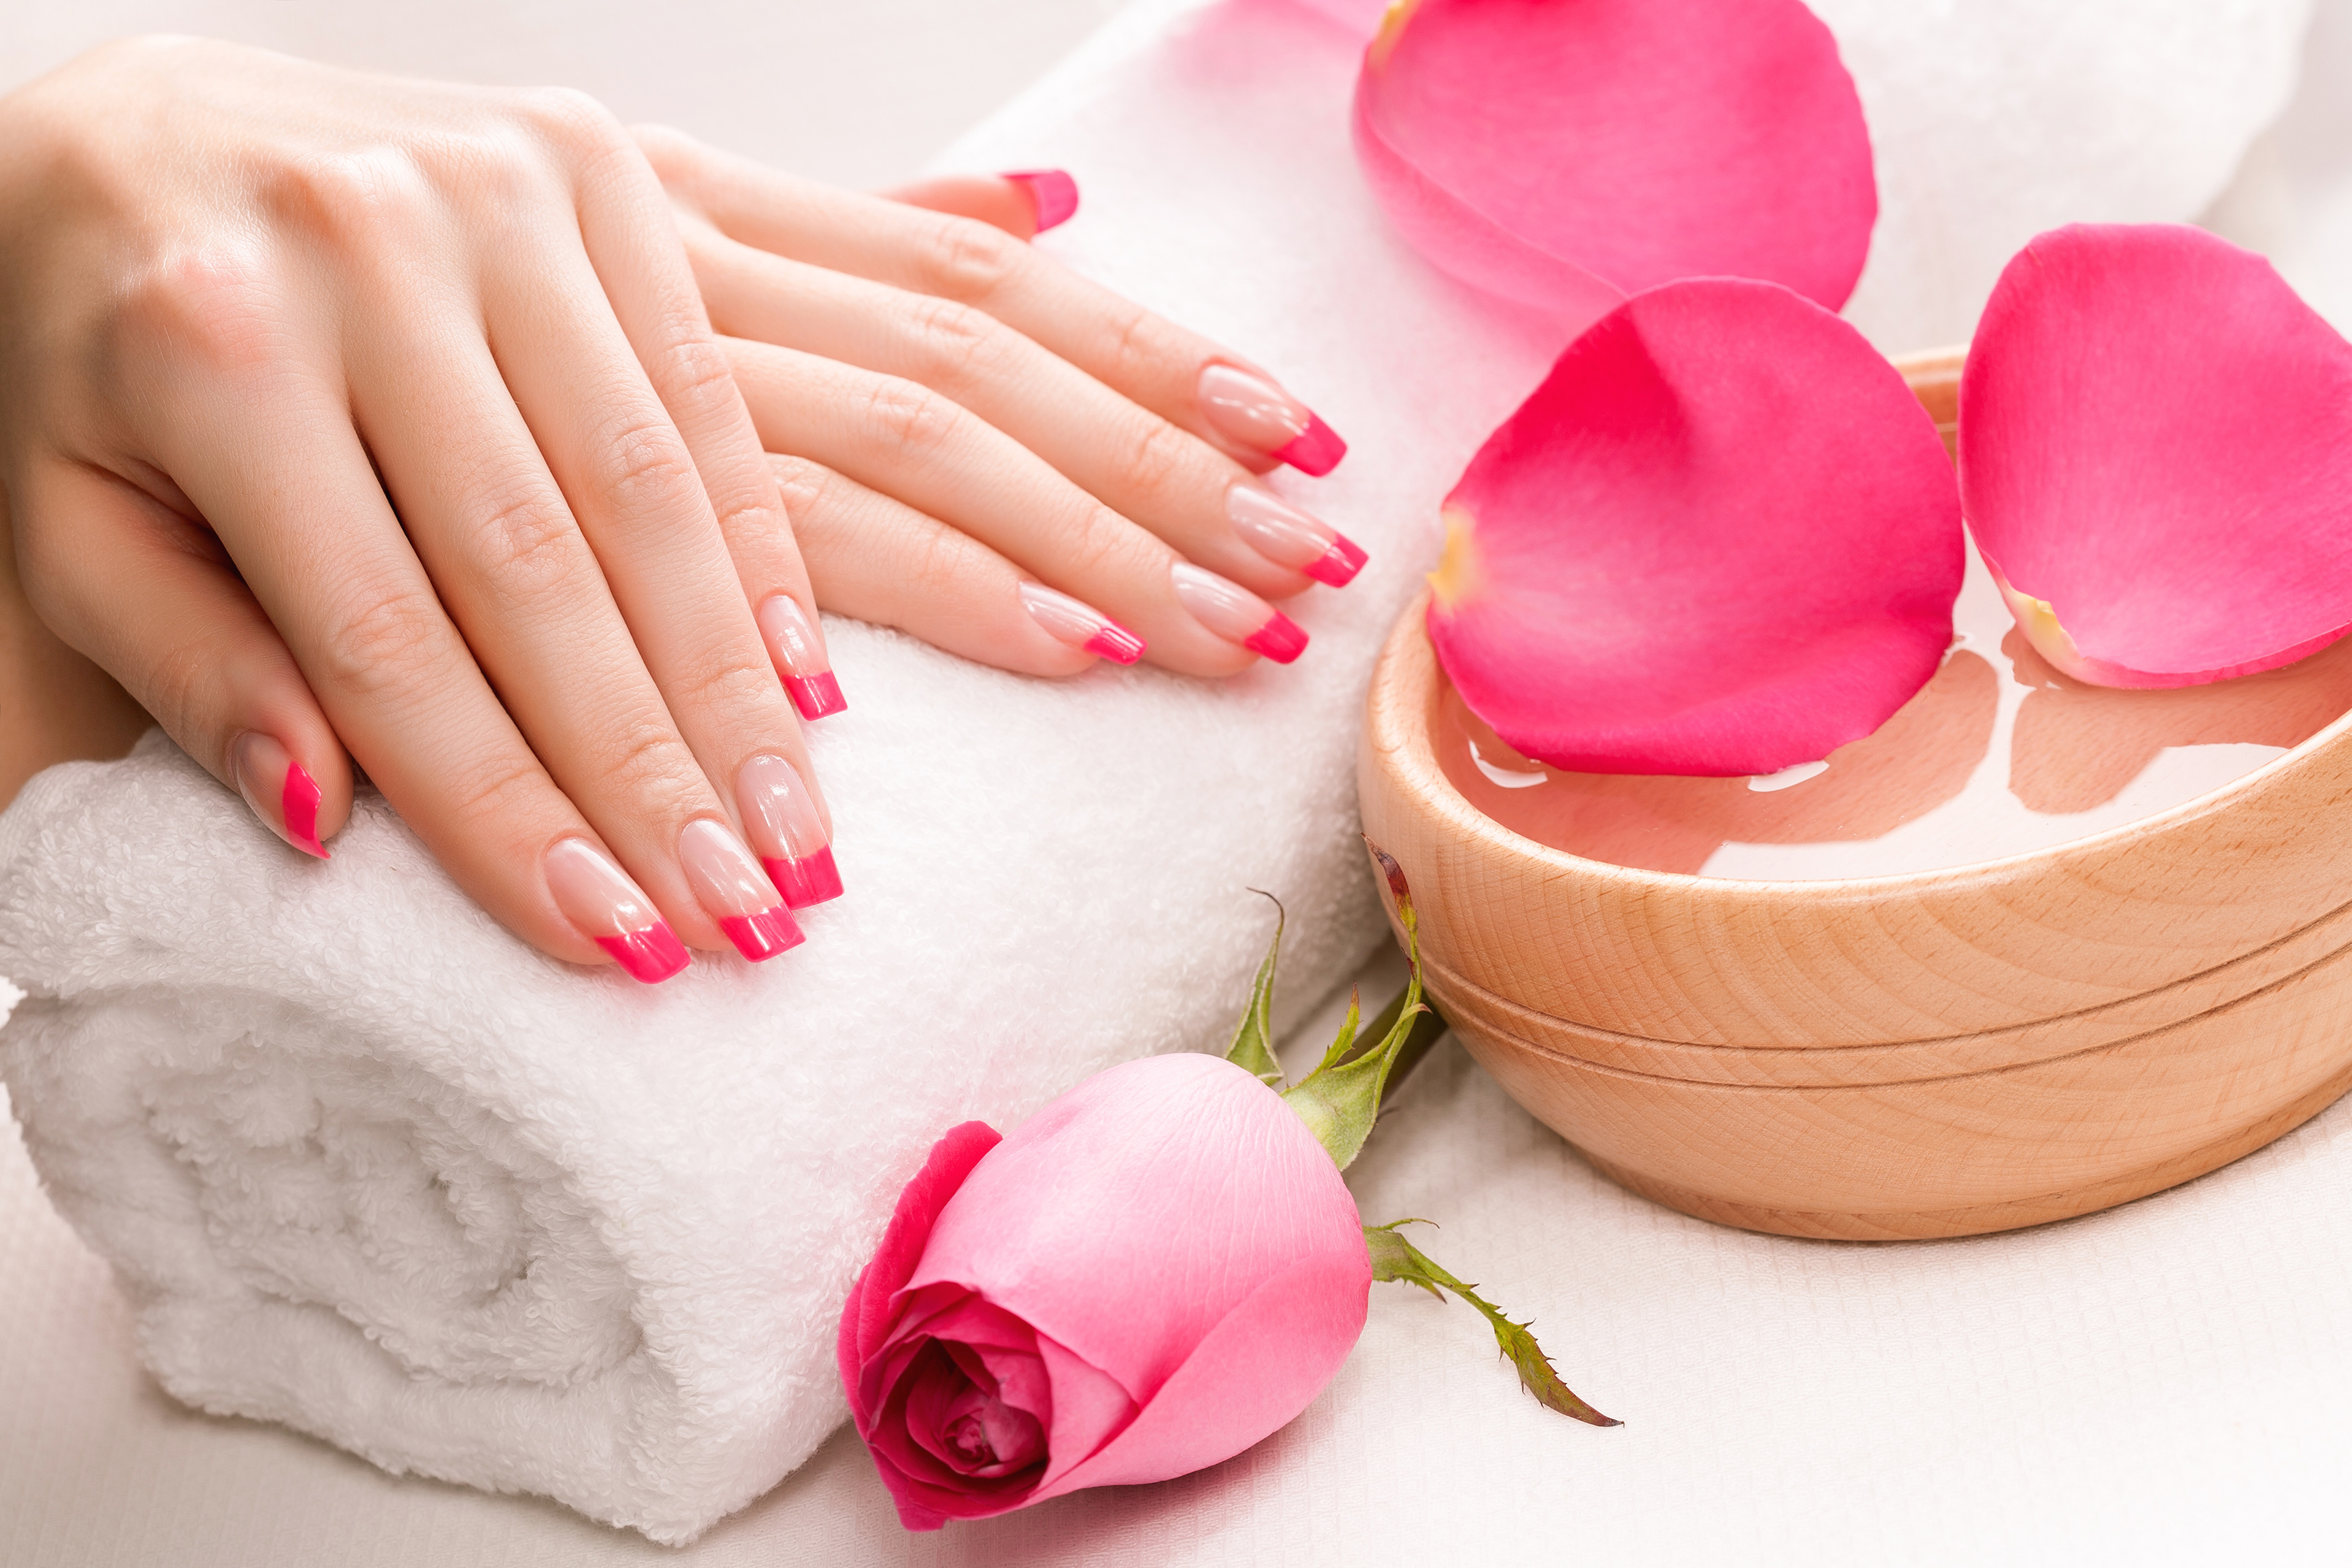 About Us - Laque Nail Bar